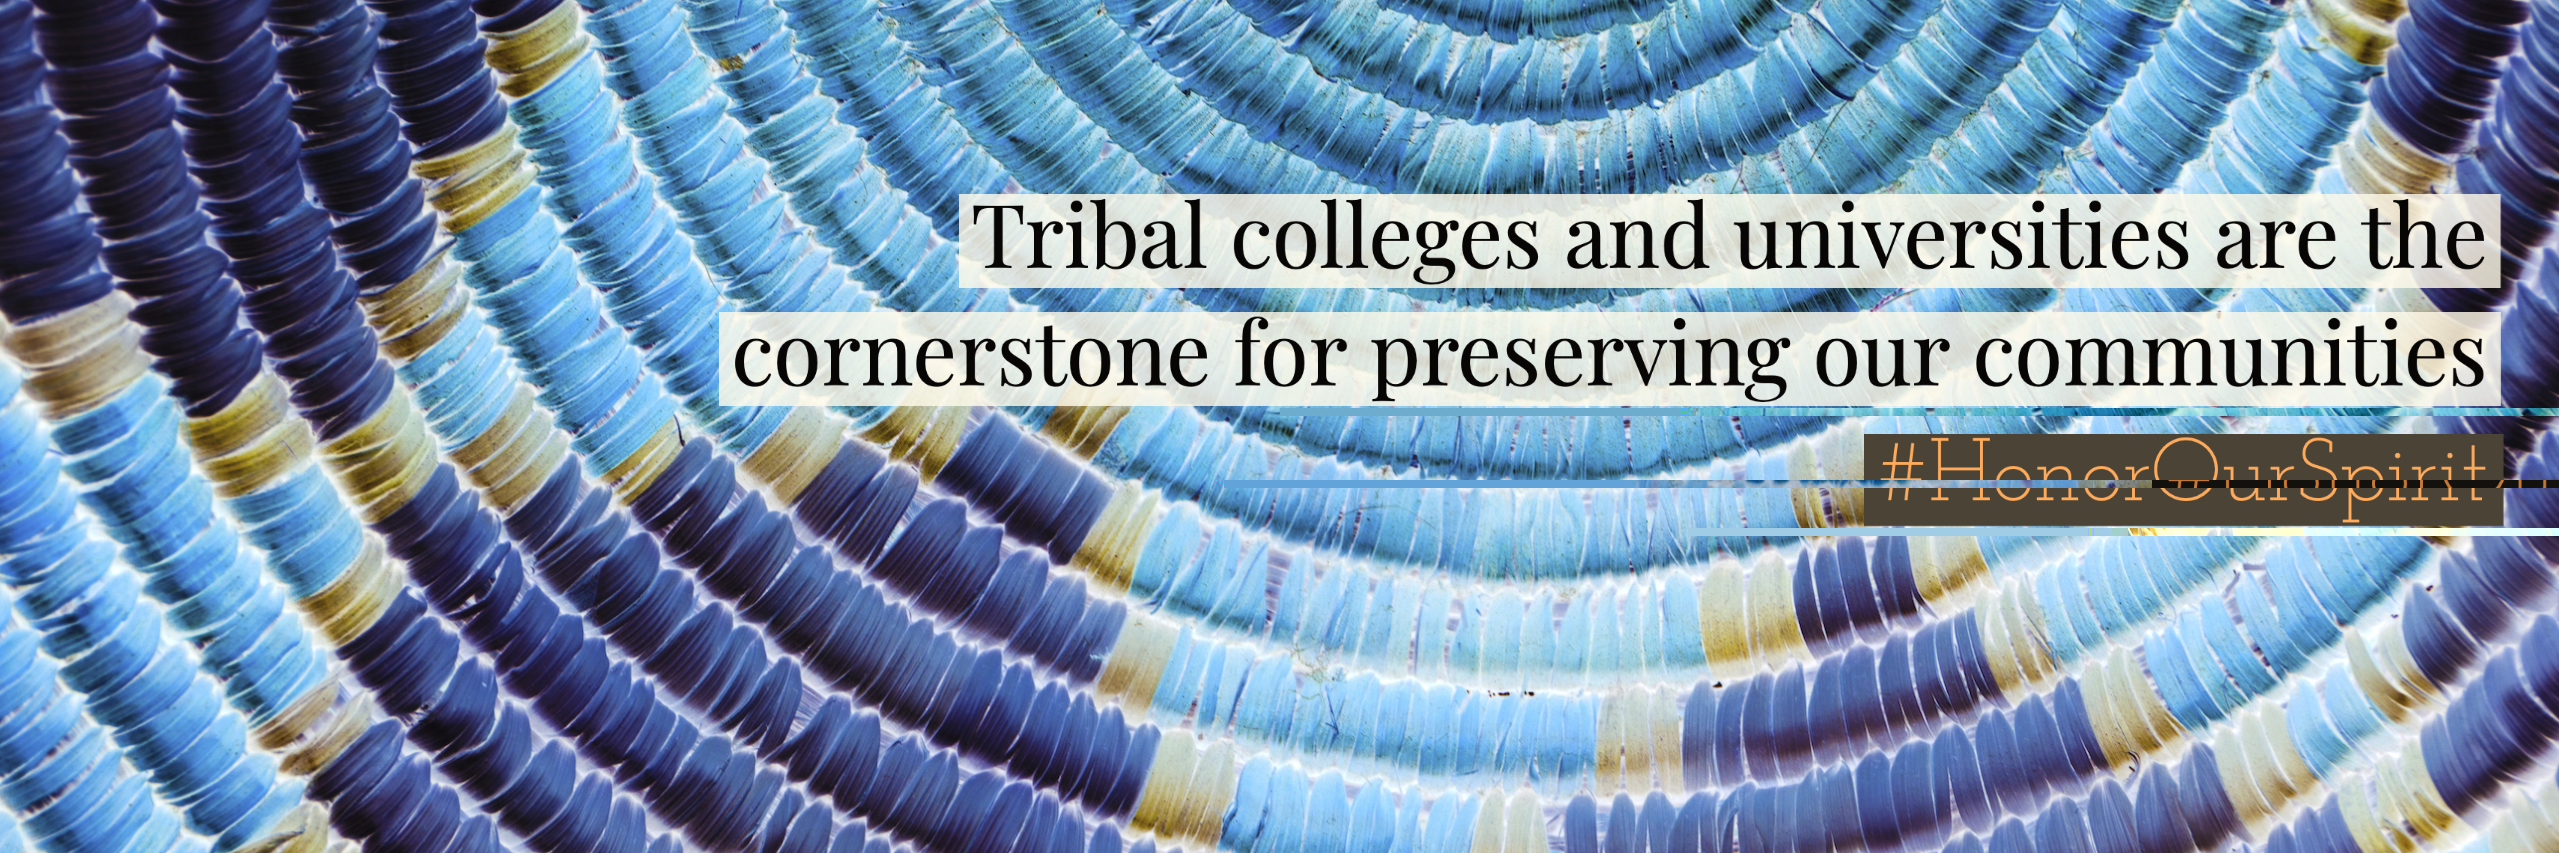 blue patterend basket with text "Tribal colleges and Universities are the cornerstone for preserving our communities"